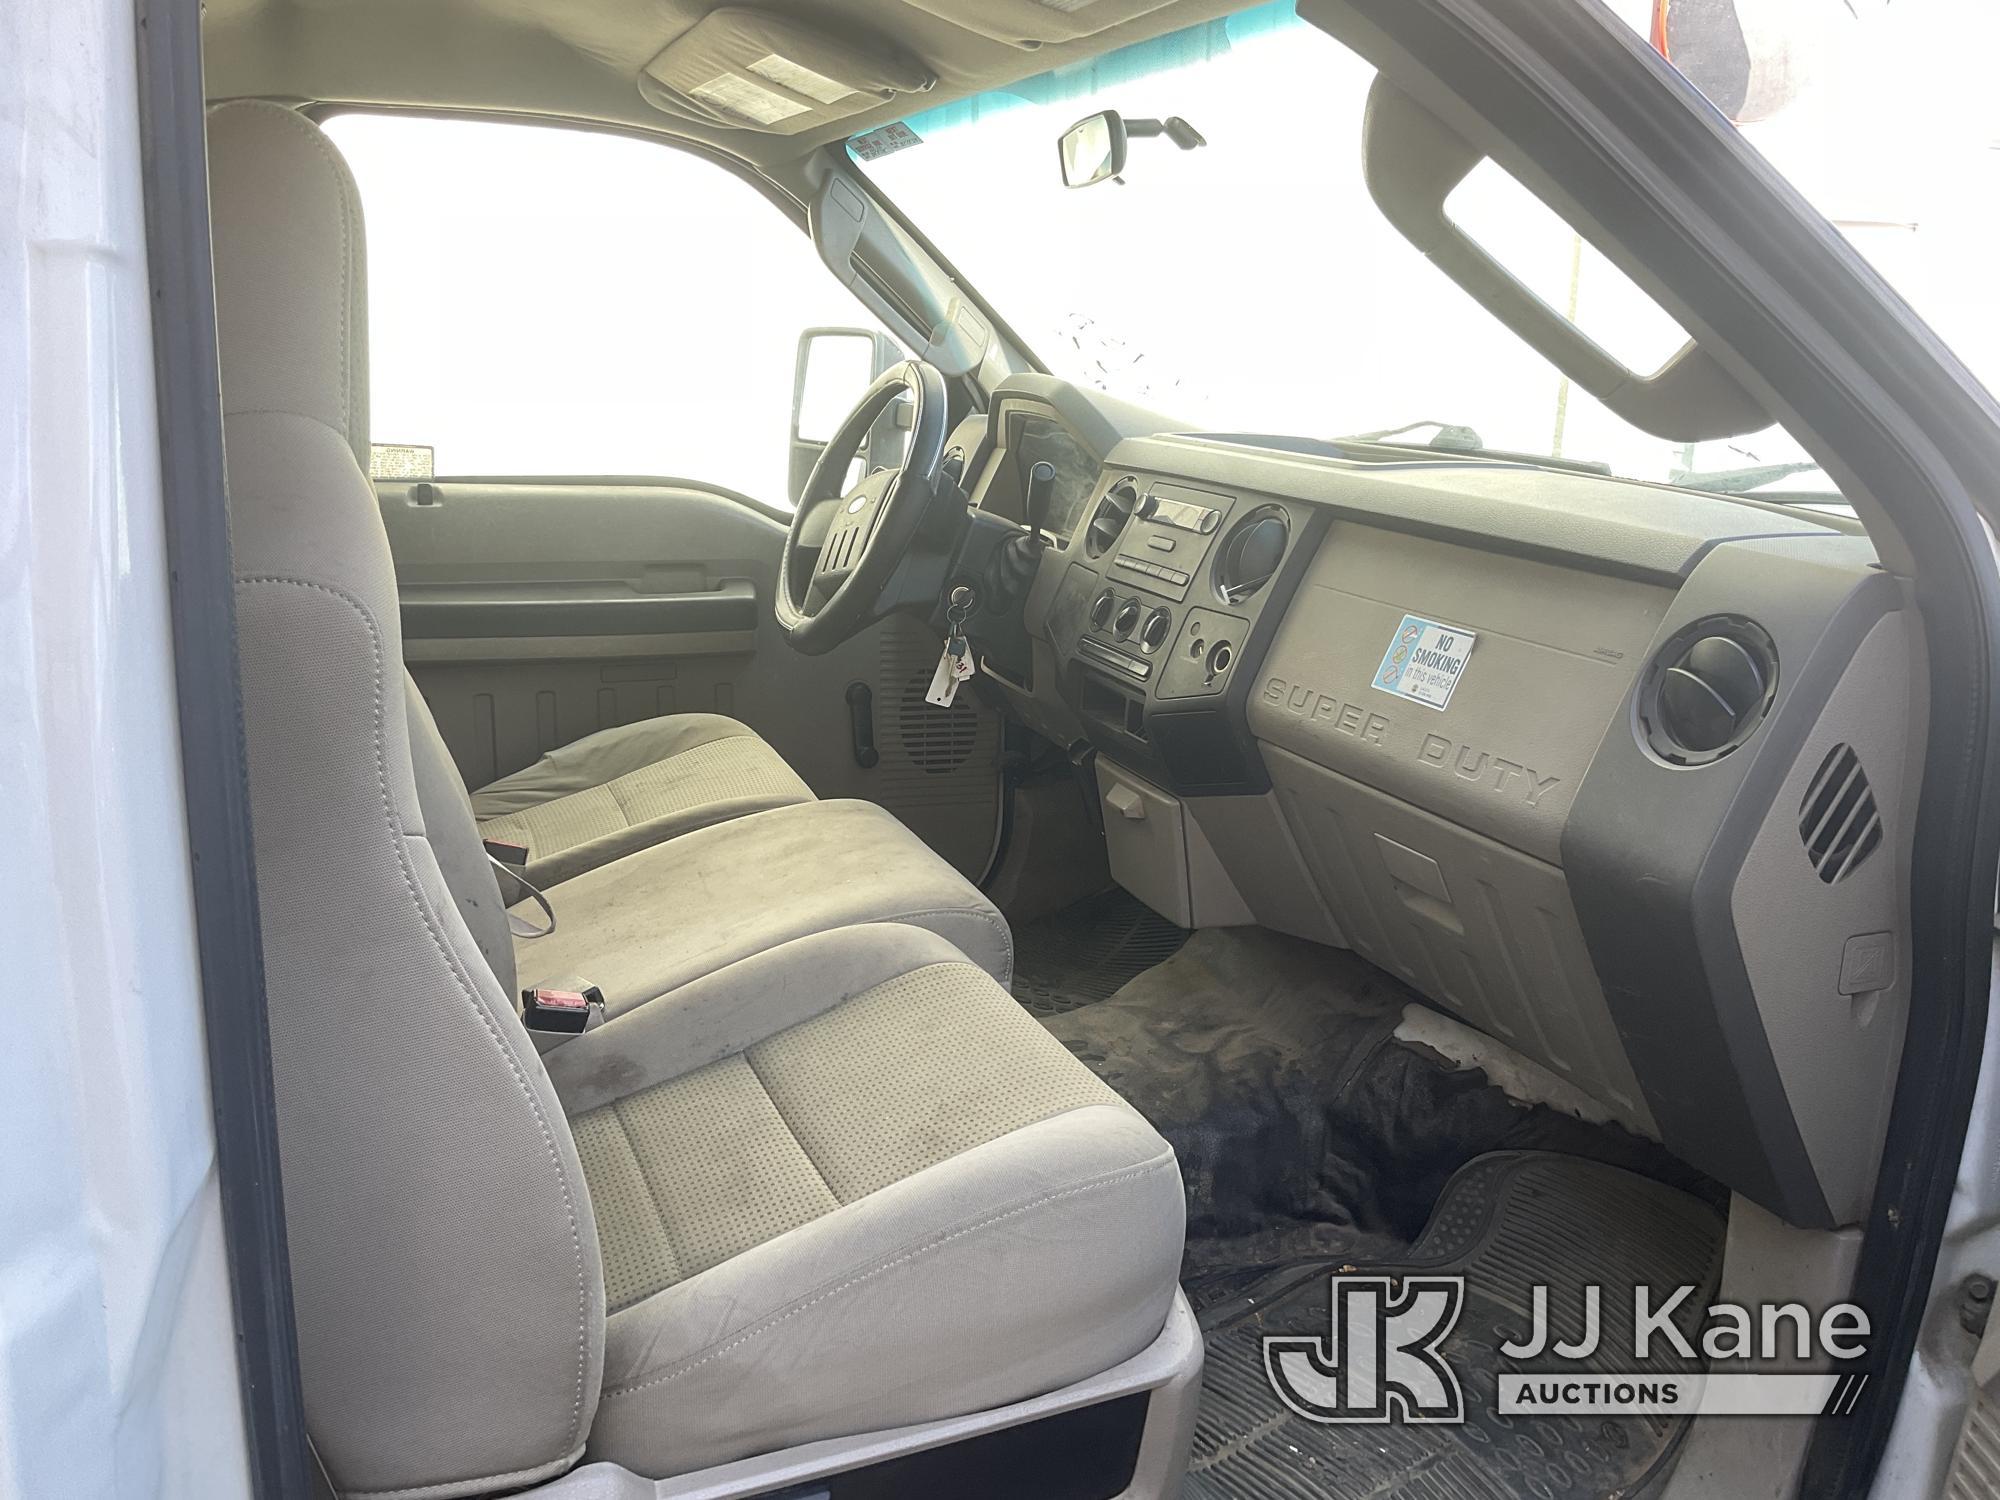 (Jurupa Valley, CA) 2008 Ford F-350 SD Utility Truck Runs & Moves, Check Engine Light Is On